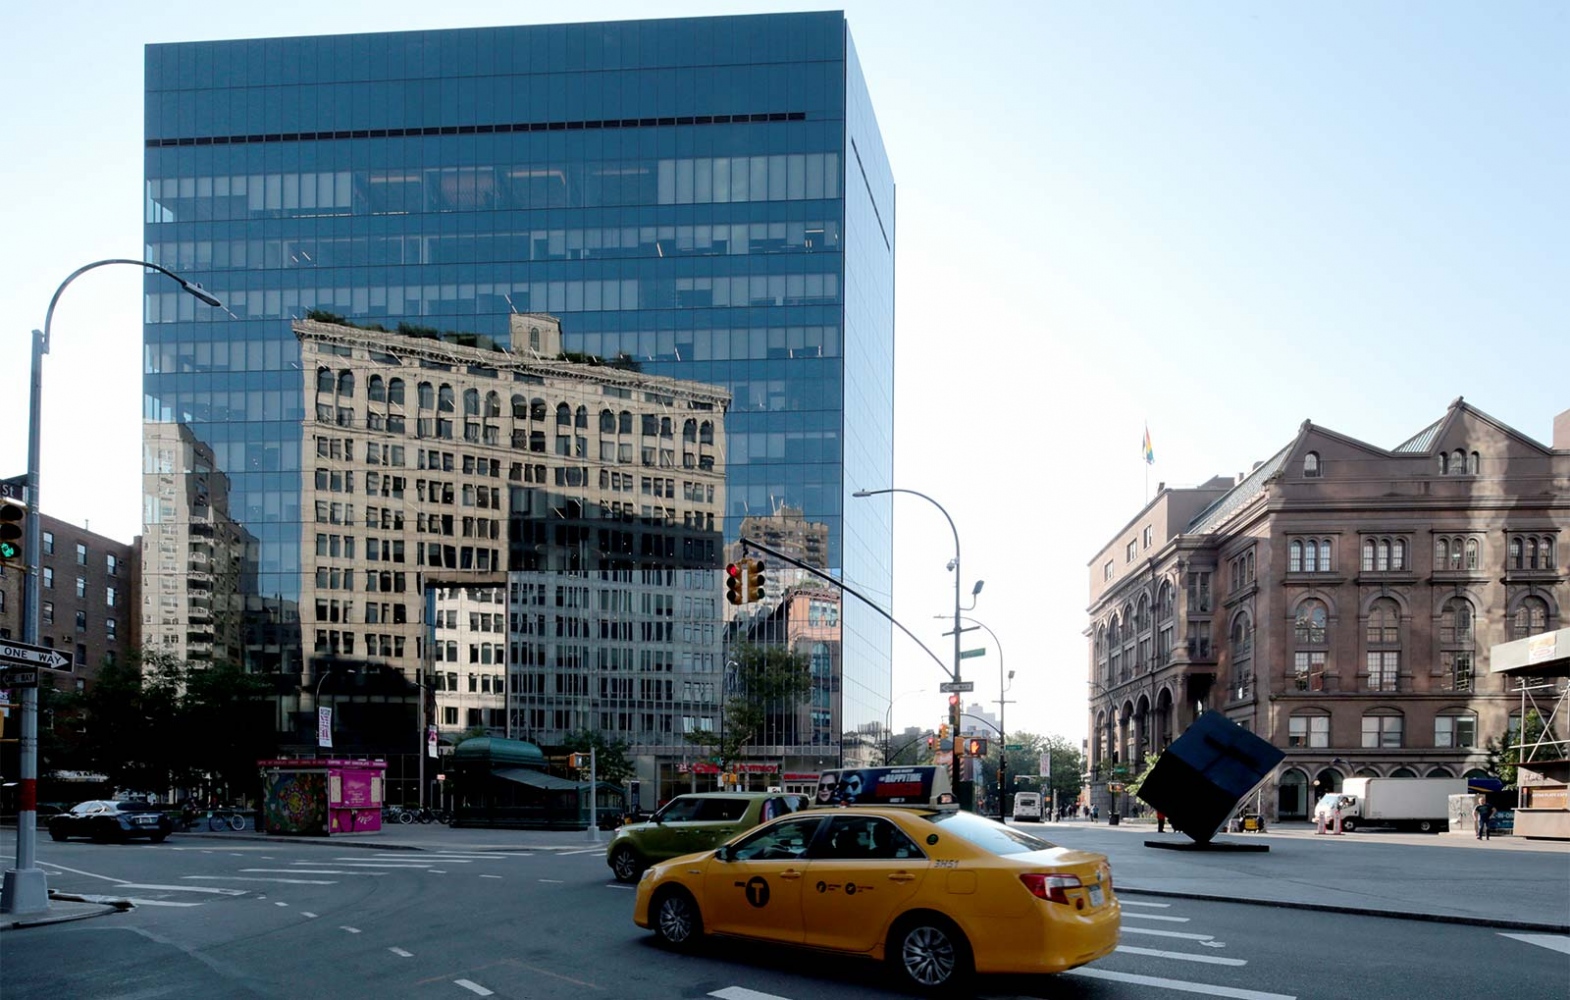 Image from Architecture - Cooper Square - New York